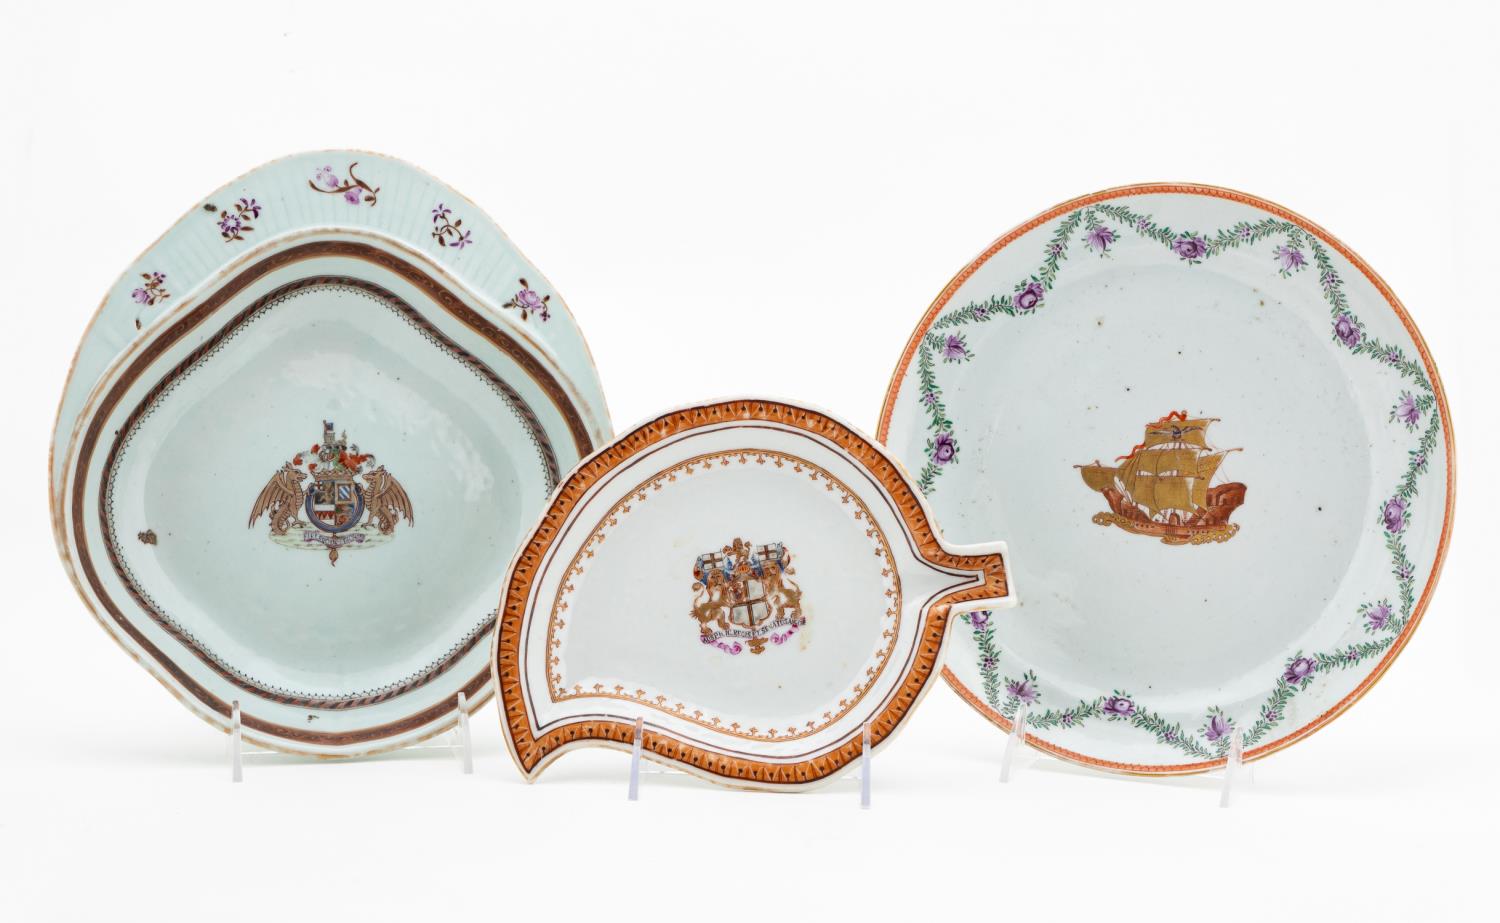 3PC, CHINESE EXPORT ARMORIAL PORCELAIN